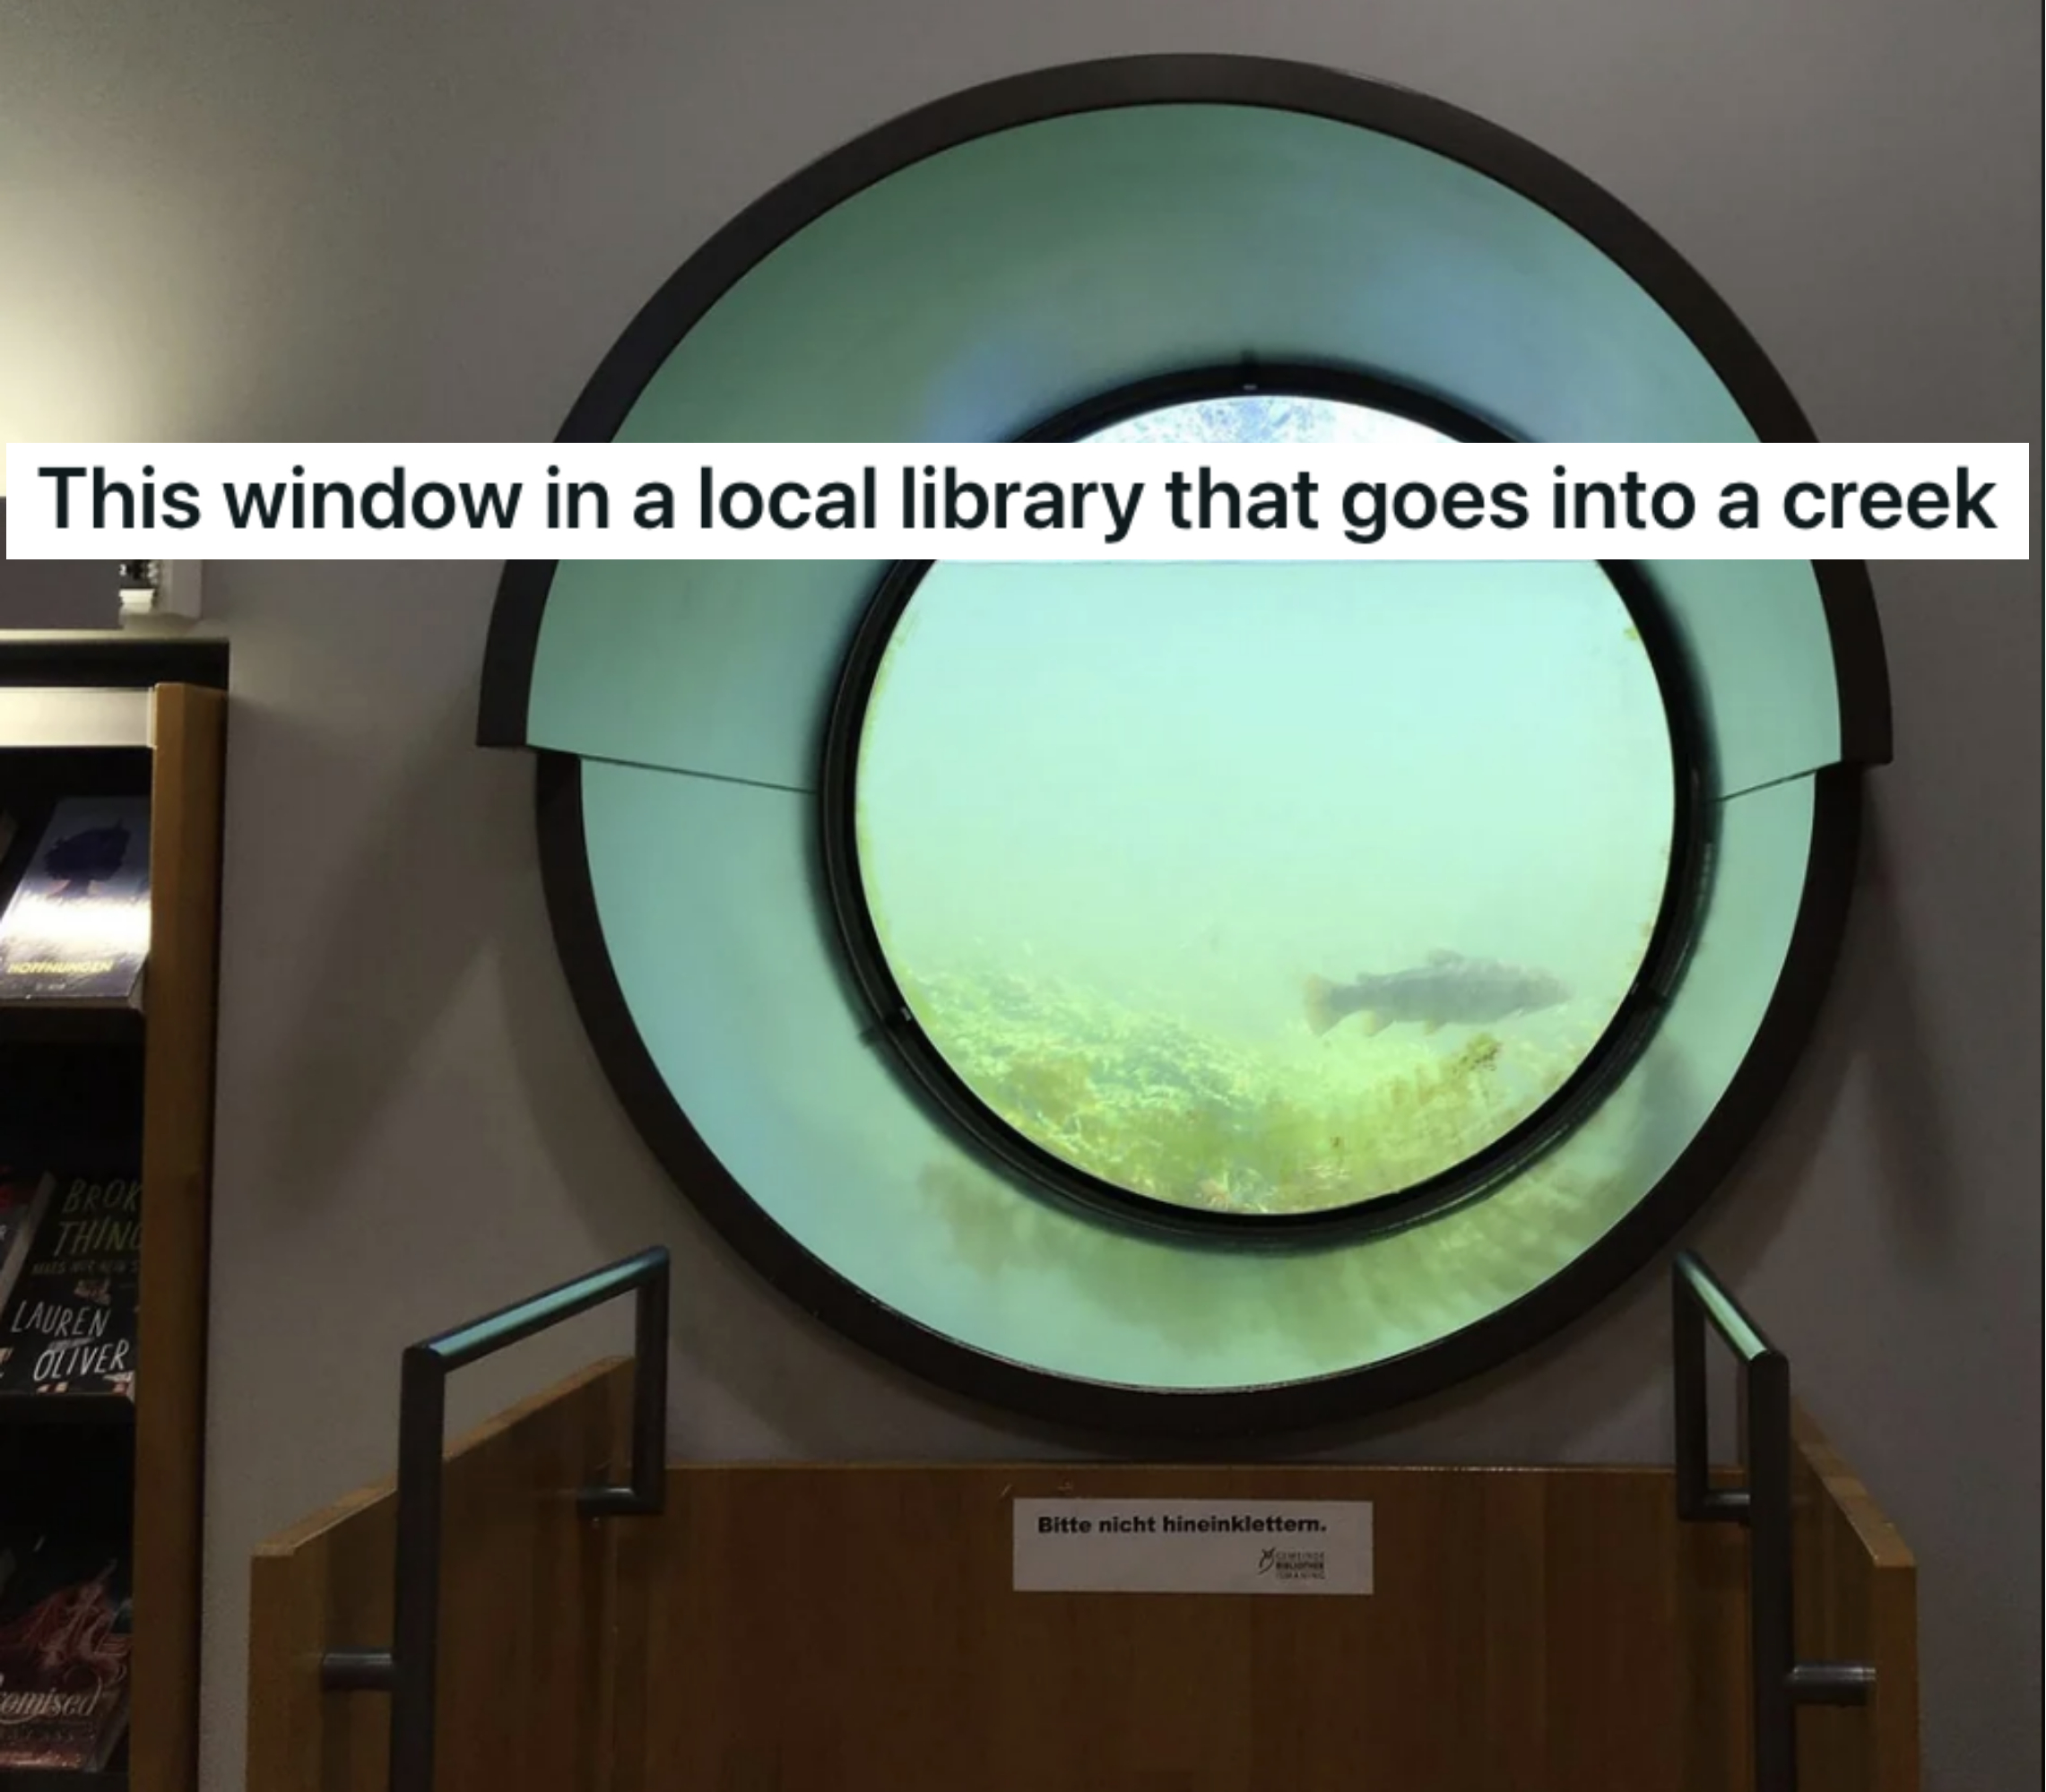 &quot;This window in a local library that goes into a creek&quot;